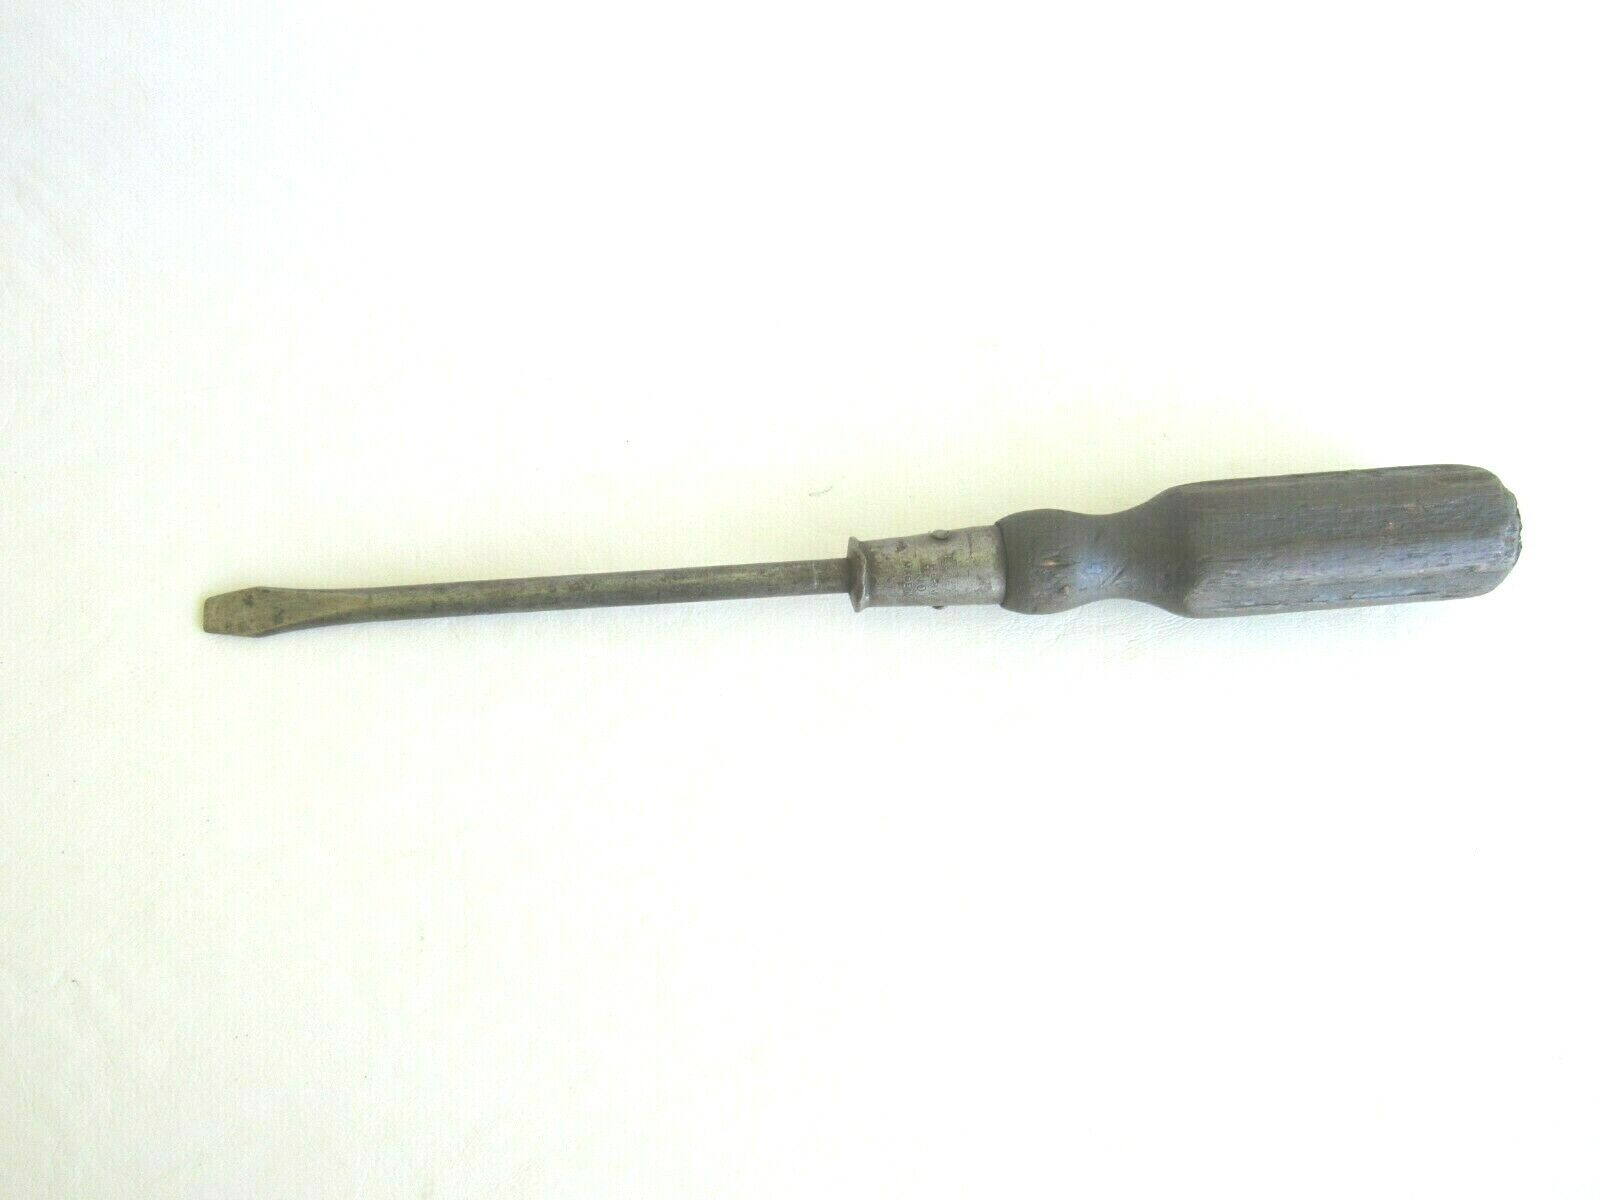 Vtg Stanley Hurwood No. 20 Flathead Screwdriver, Made In U.s.a. About 11 1/2" L